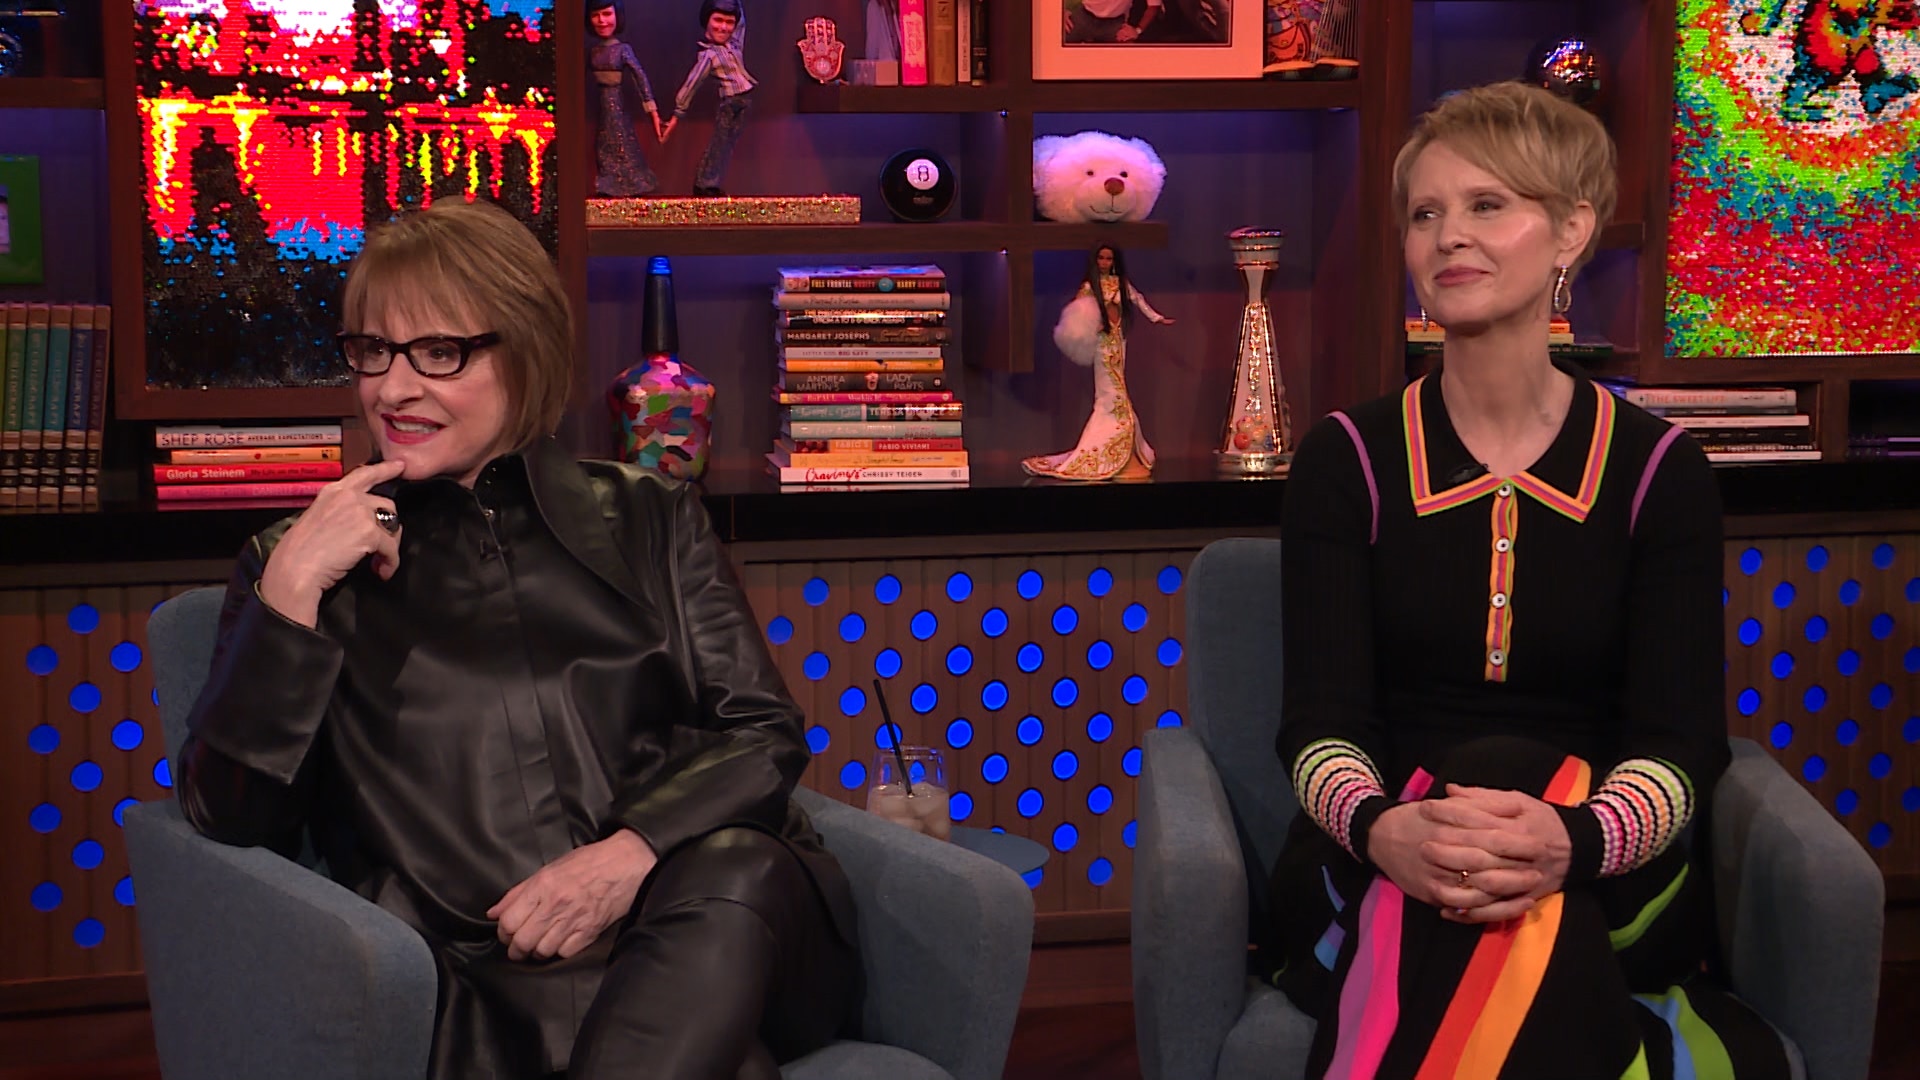 Watch The Worst Broadway Shows, According to Patti LuPone Watch What